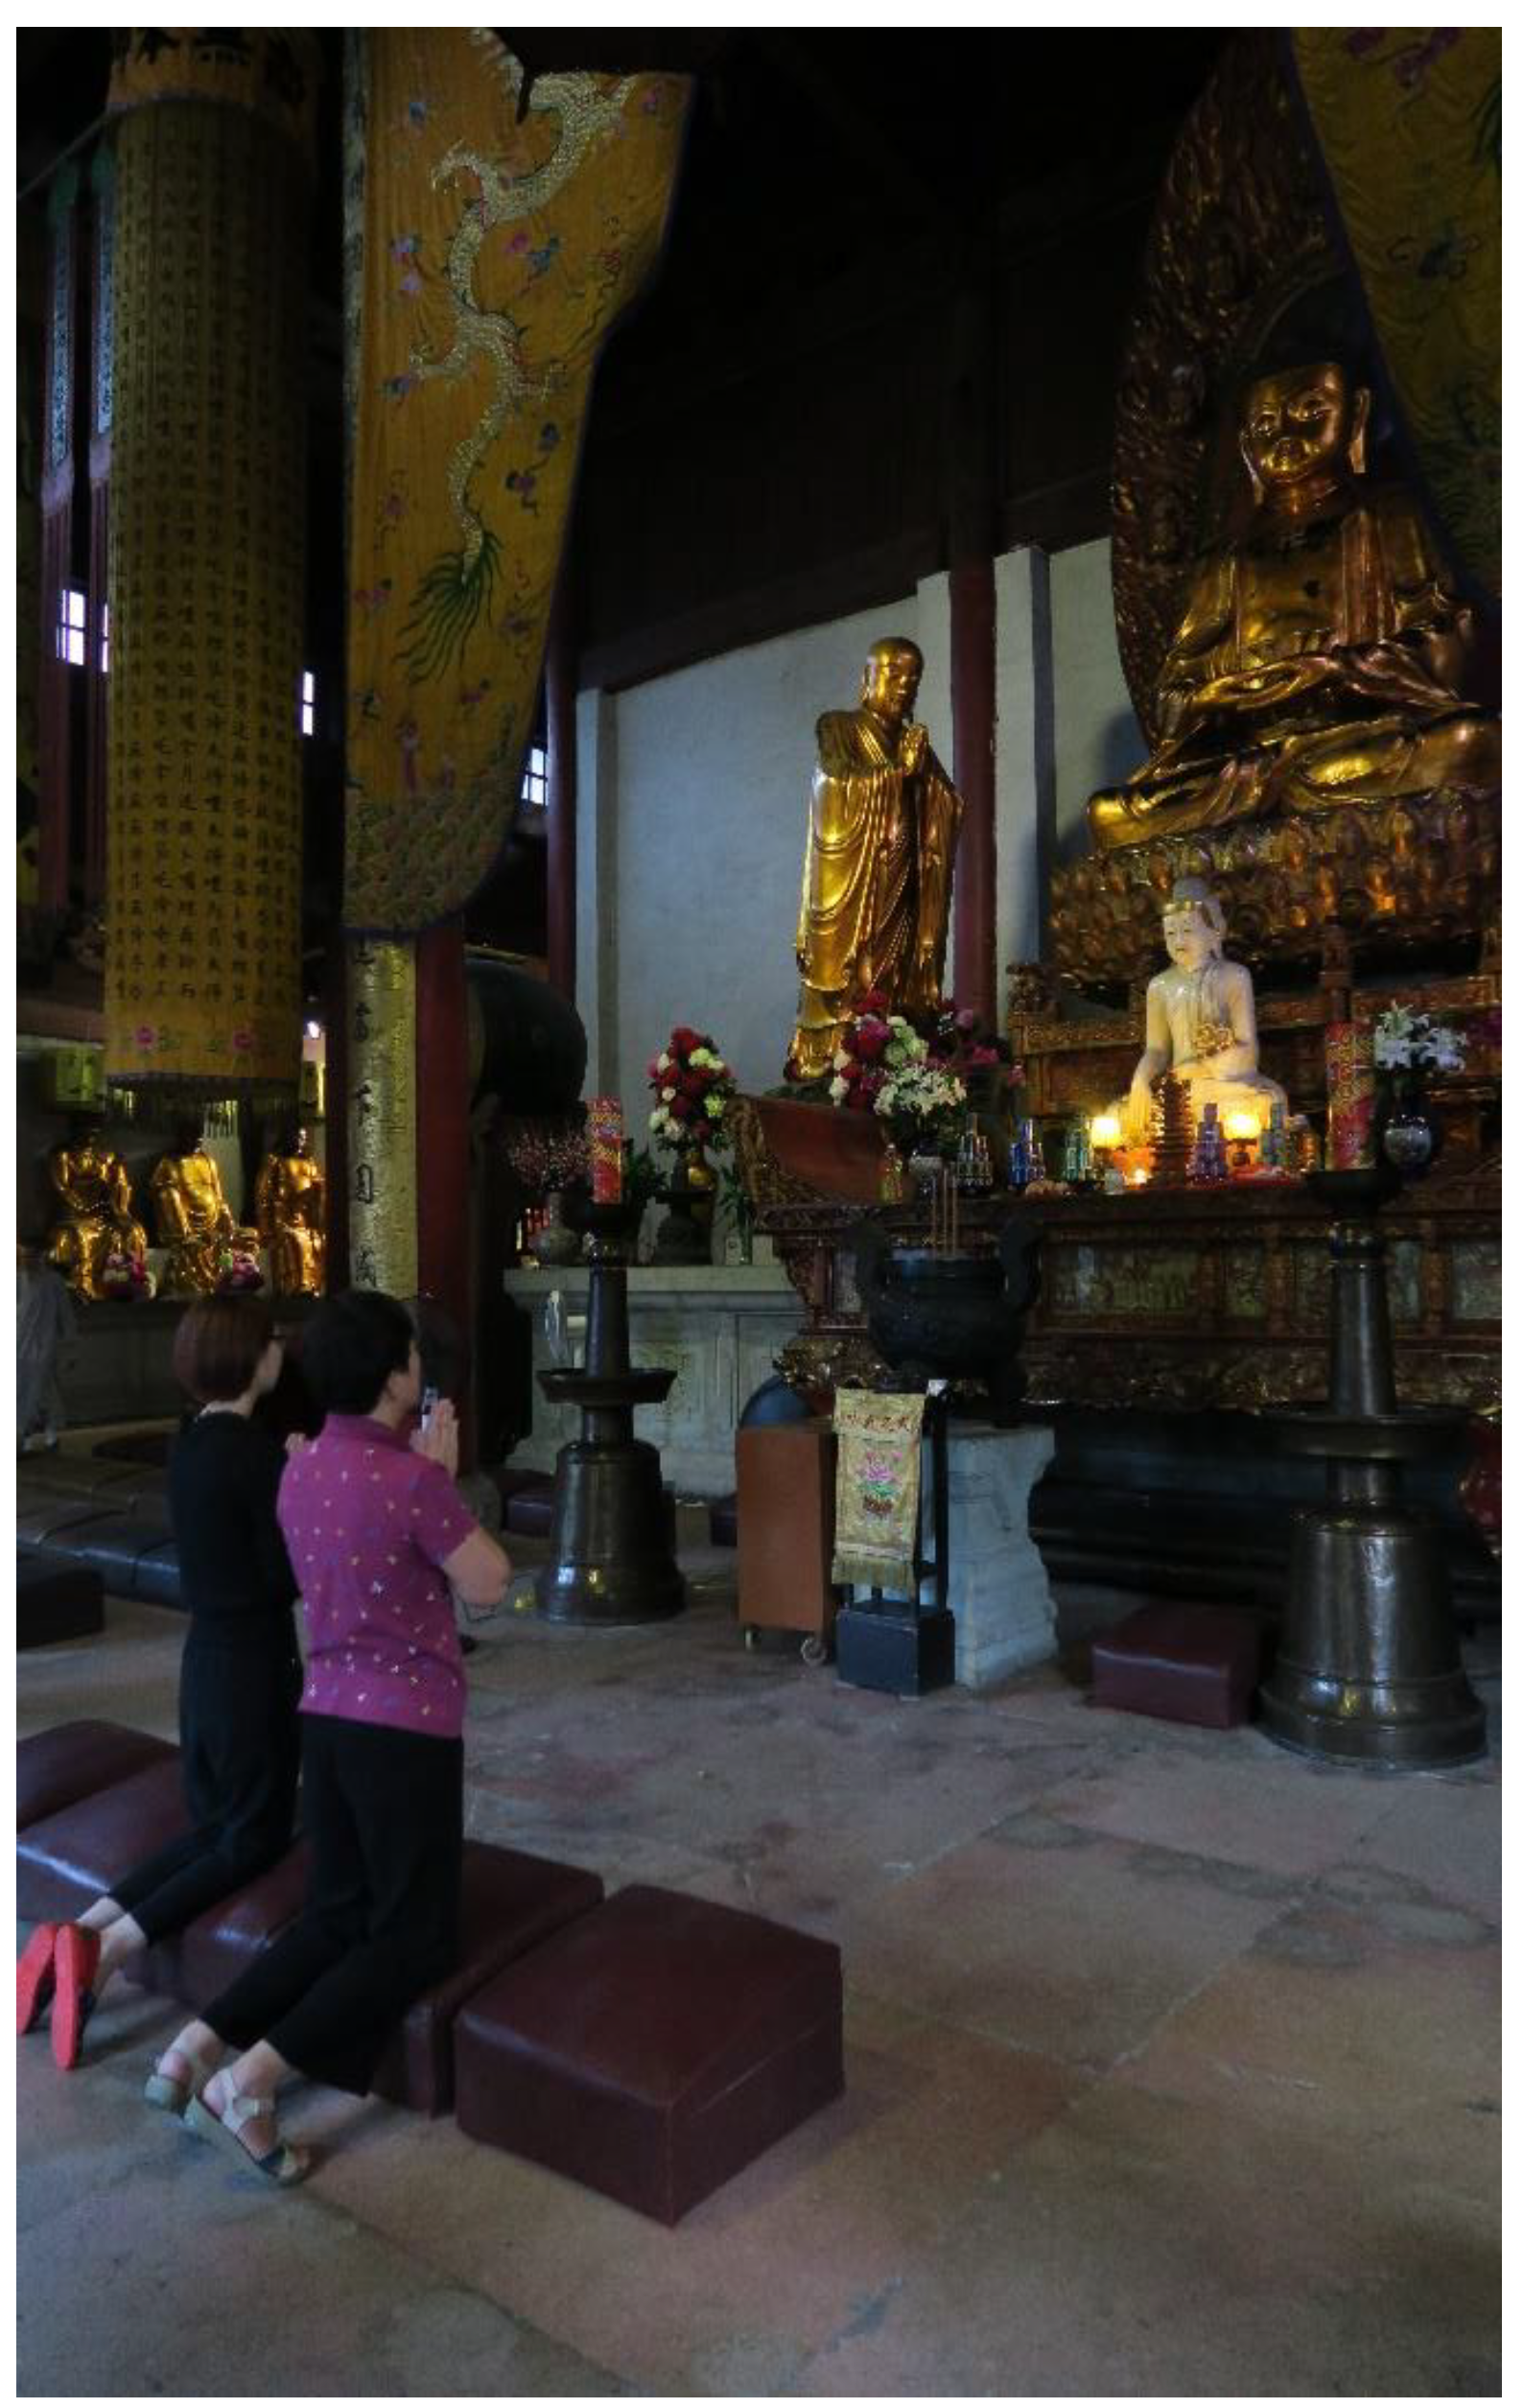 Religions | Free Full-Text | Comparative Review of Worship Spaces in  Buddhist and Cistercian Monasteries: The Three Temples of Guoqing Si  (China) and the Church of the Royal Abbey of Santa Maria